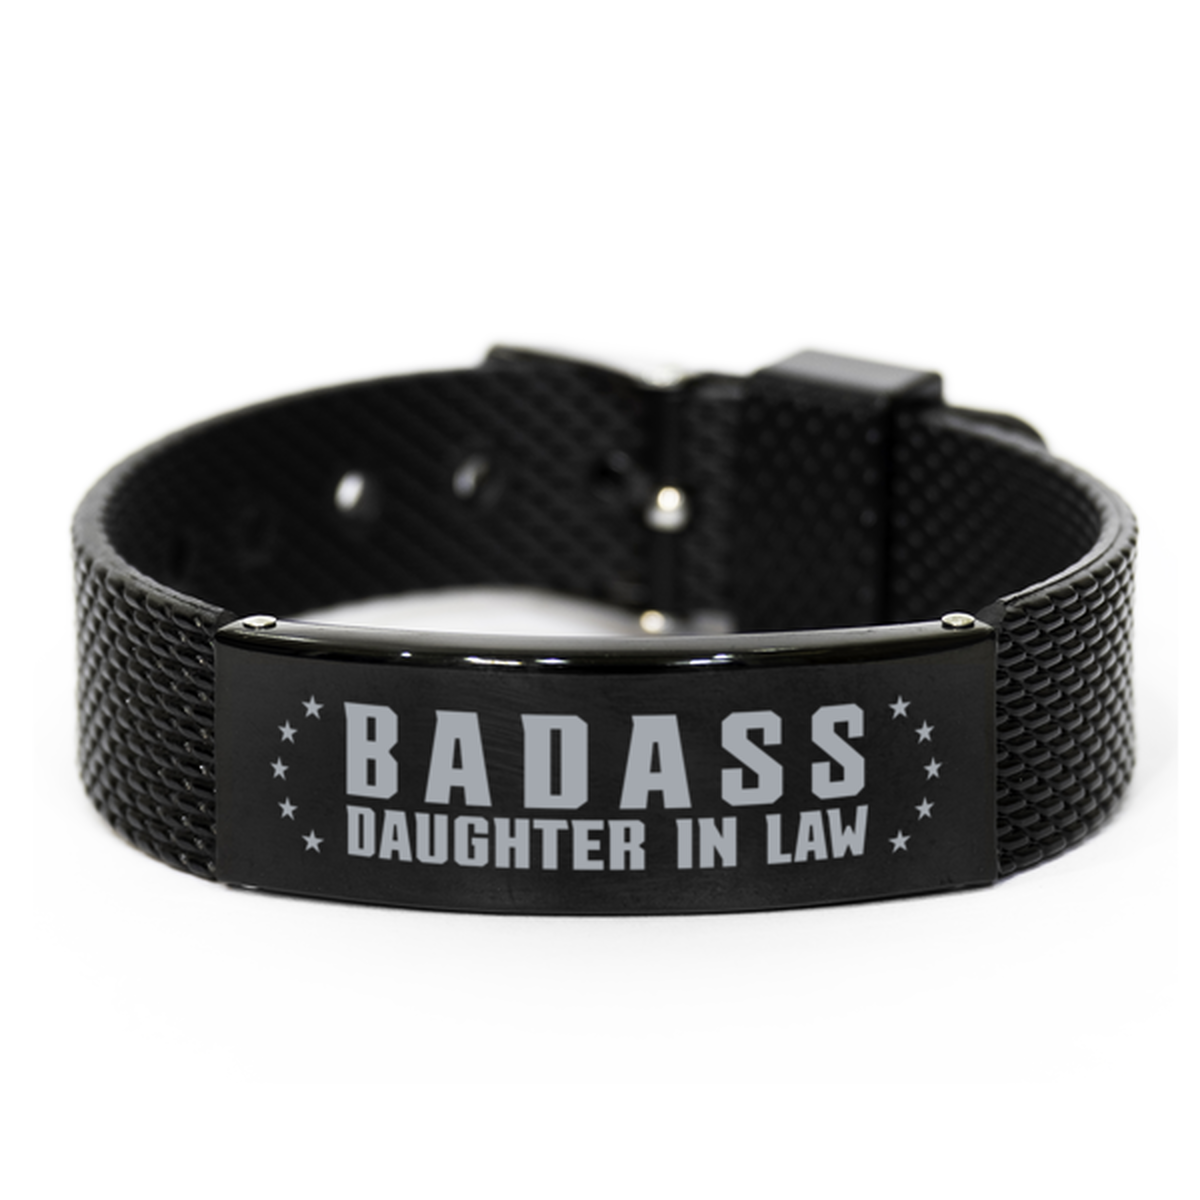 Daughter in law Black Shark Mesh Bracelet, Badass Daughter in law, Funny Family Gifts For Daughter in law From Mother Father In Law